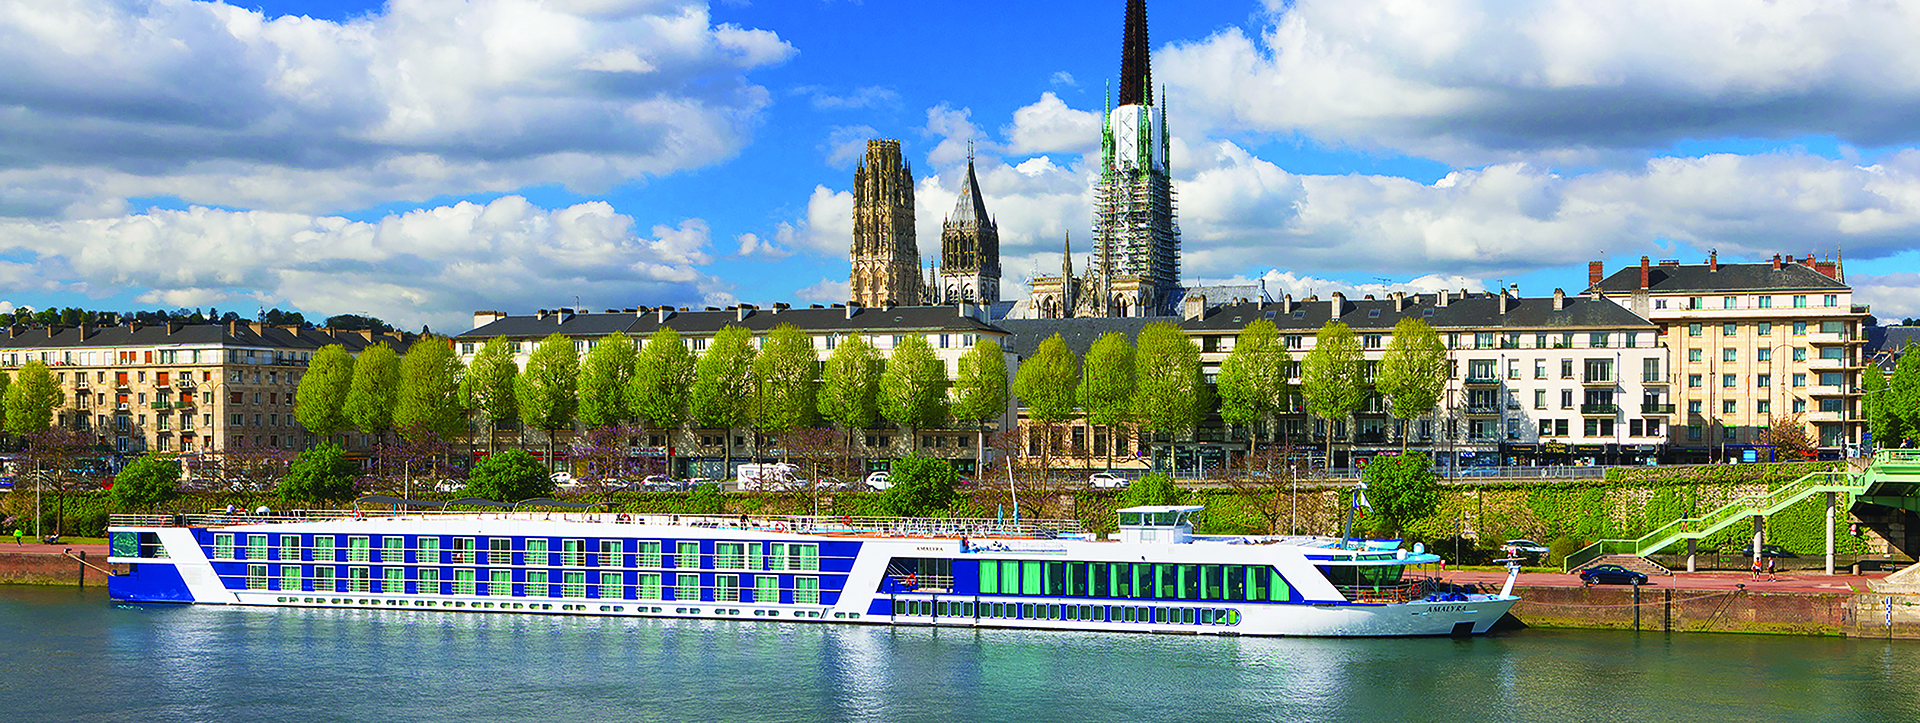 AmaWaterways Partner of the Month